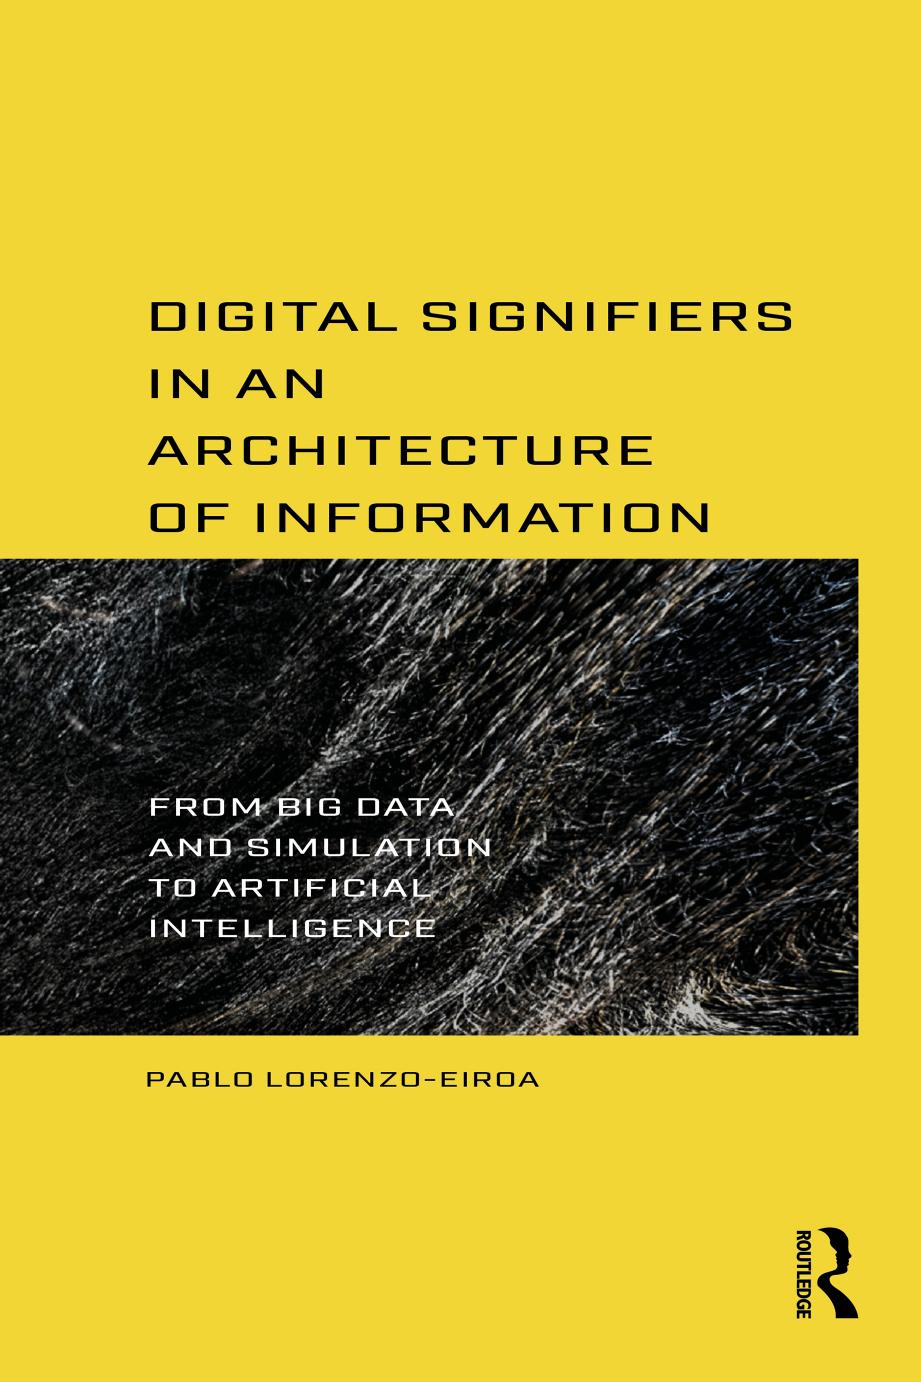 Digital Signifiers in an Architecture of Information: From Big Data and Simulation to Artificial Intelligence by Pablo Lorenzo-Eiroa